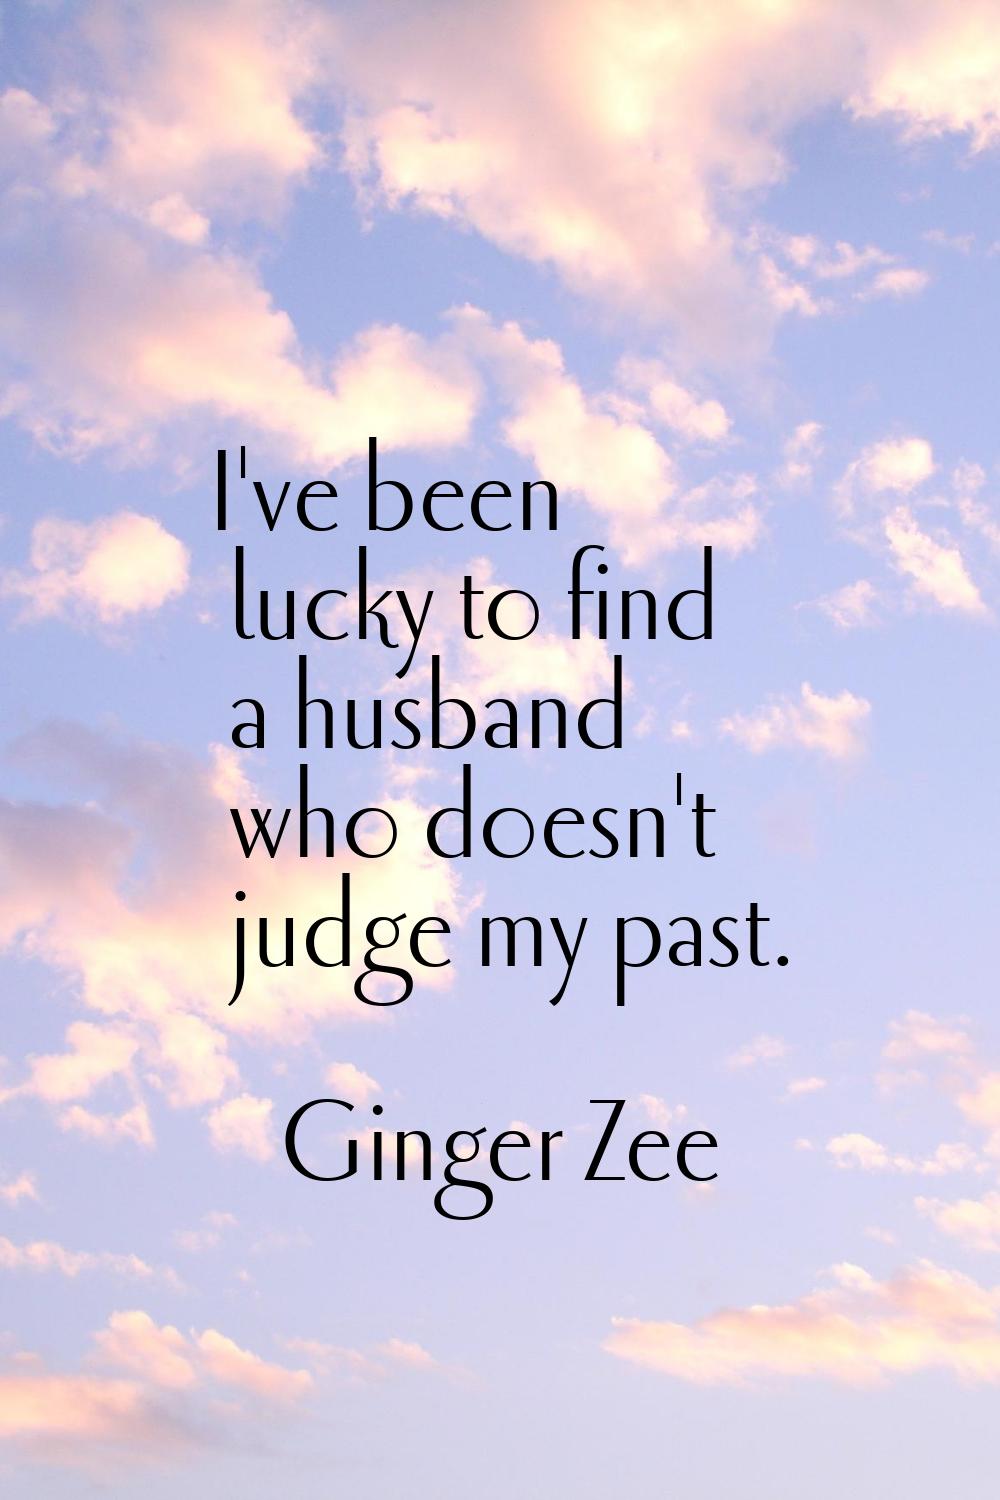 I've been lucky to find a husband who doesn't judge my past.